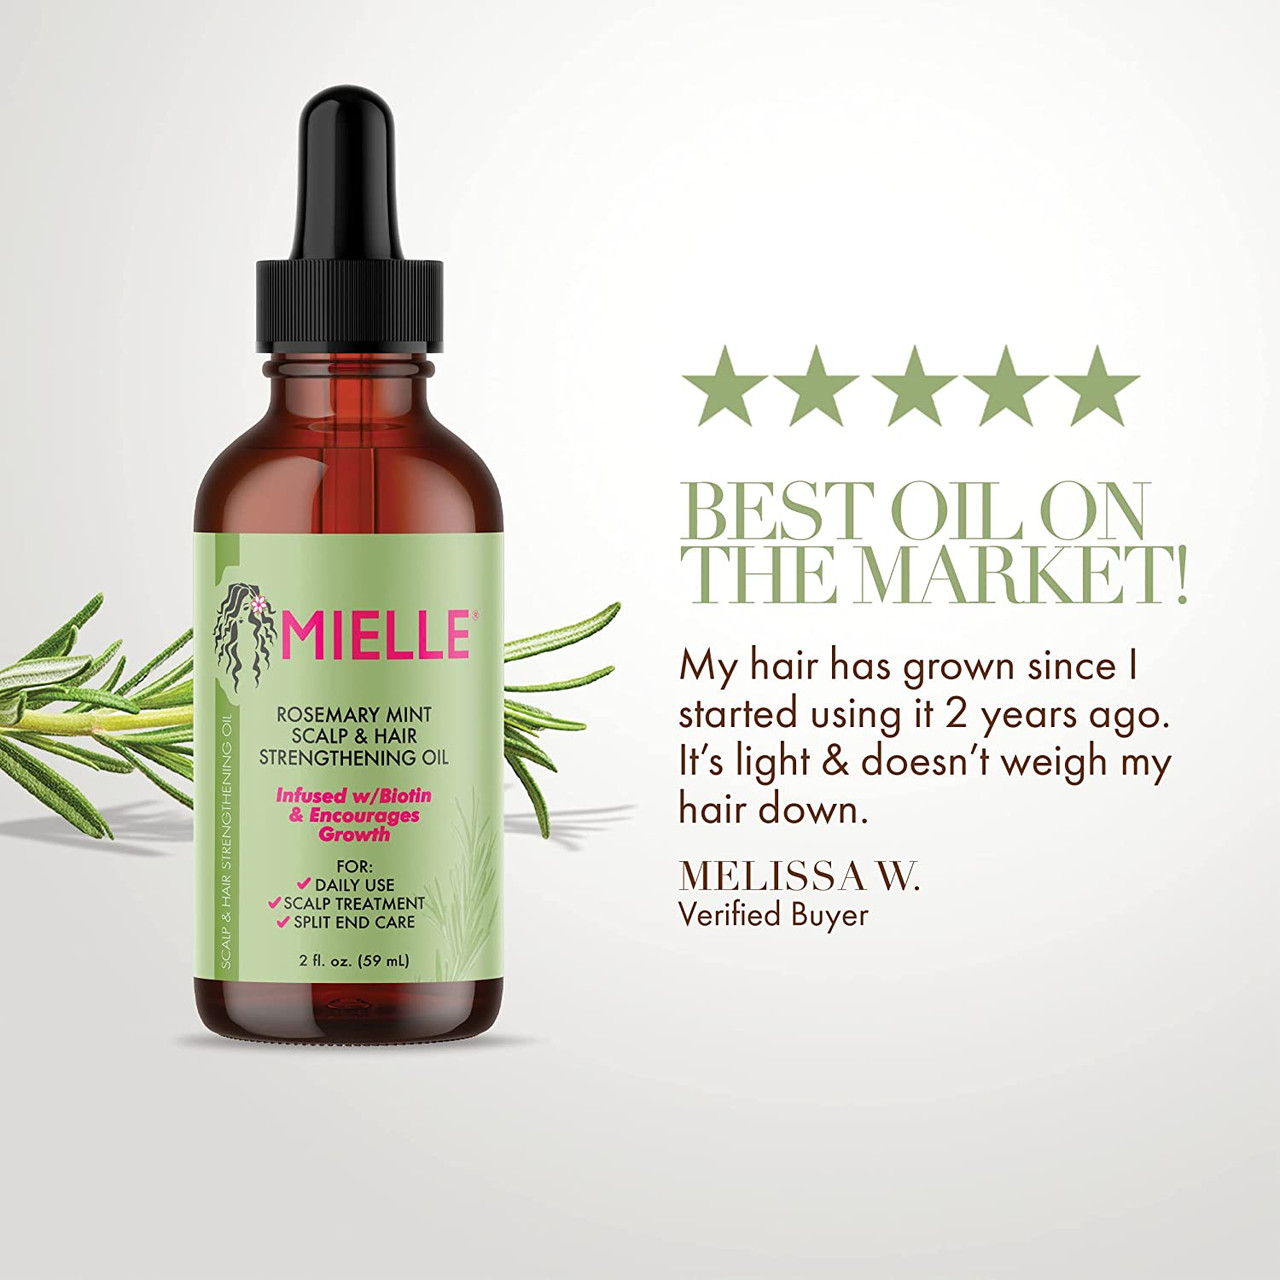 Mielle Organics Rosemary Mint Scalp And Hair Strengthening Oil 2 Oz Naturallycurly 0359